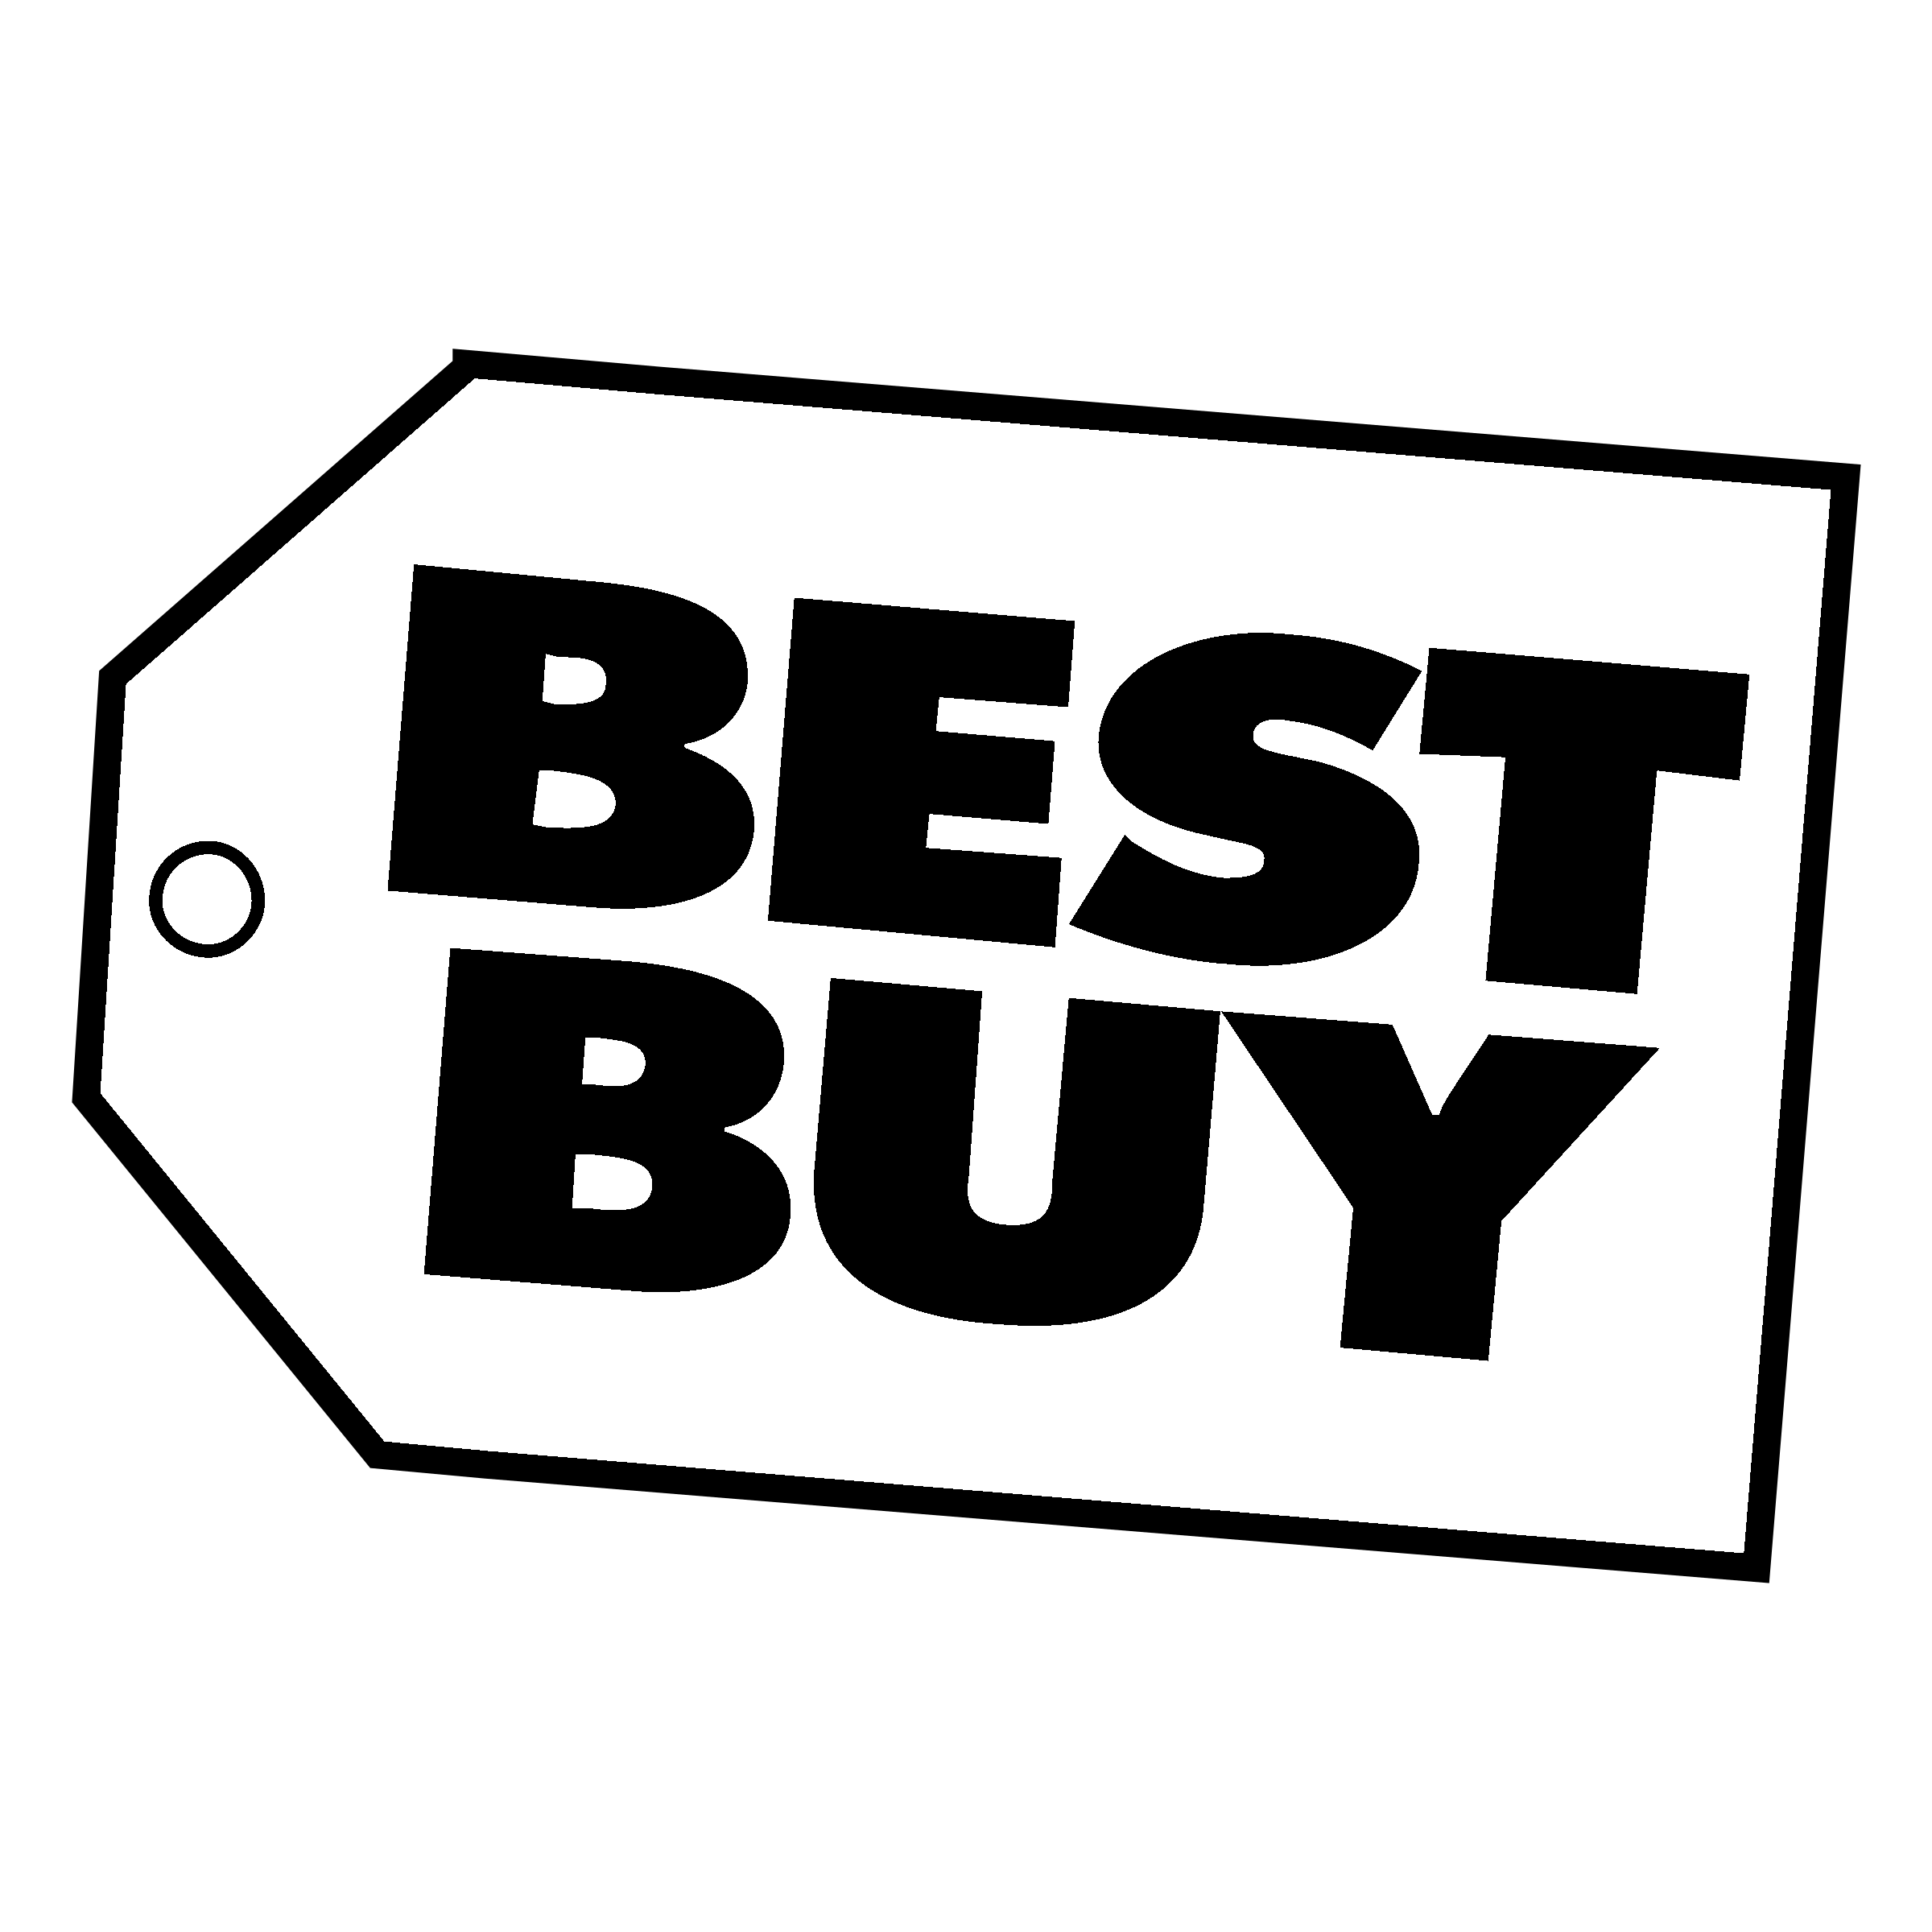 best-buy-logo-black-and-white.png